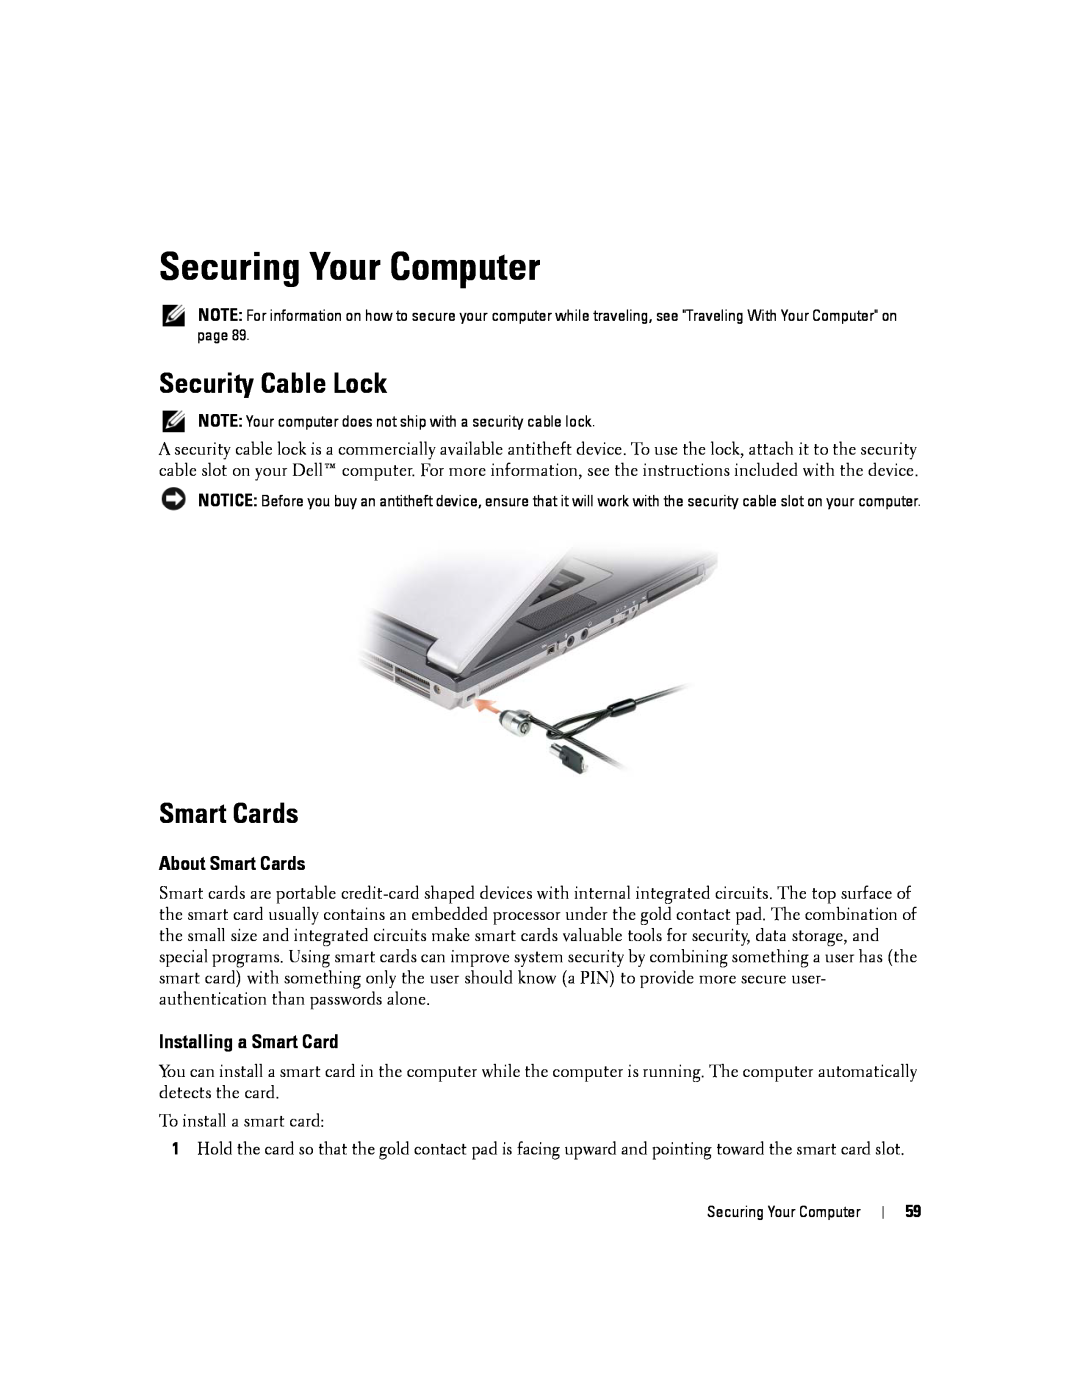 Dell D830, PP04X manual Securing Your Computer, Security Cable Lock, About Smart Cards, Installing a Smart Card 